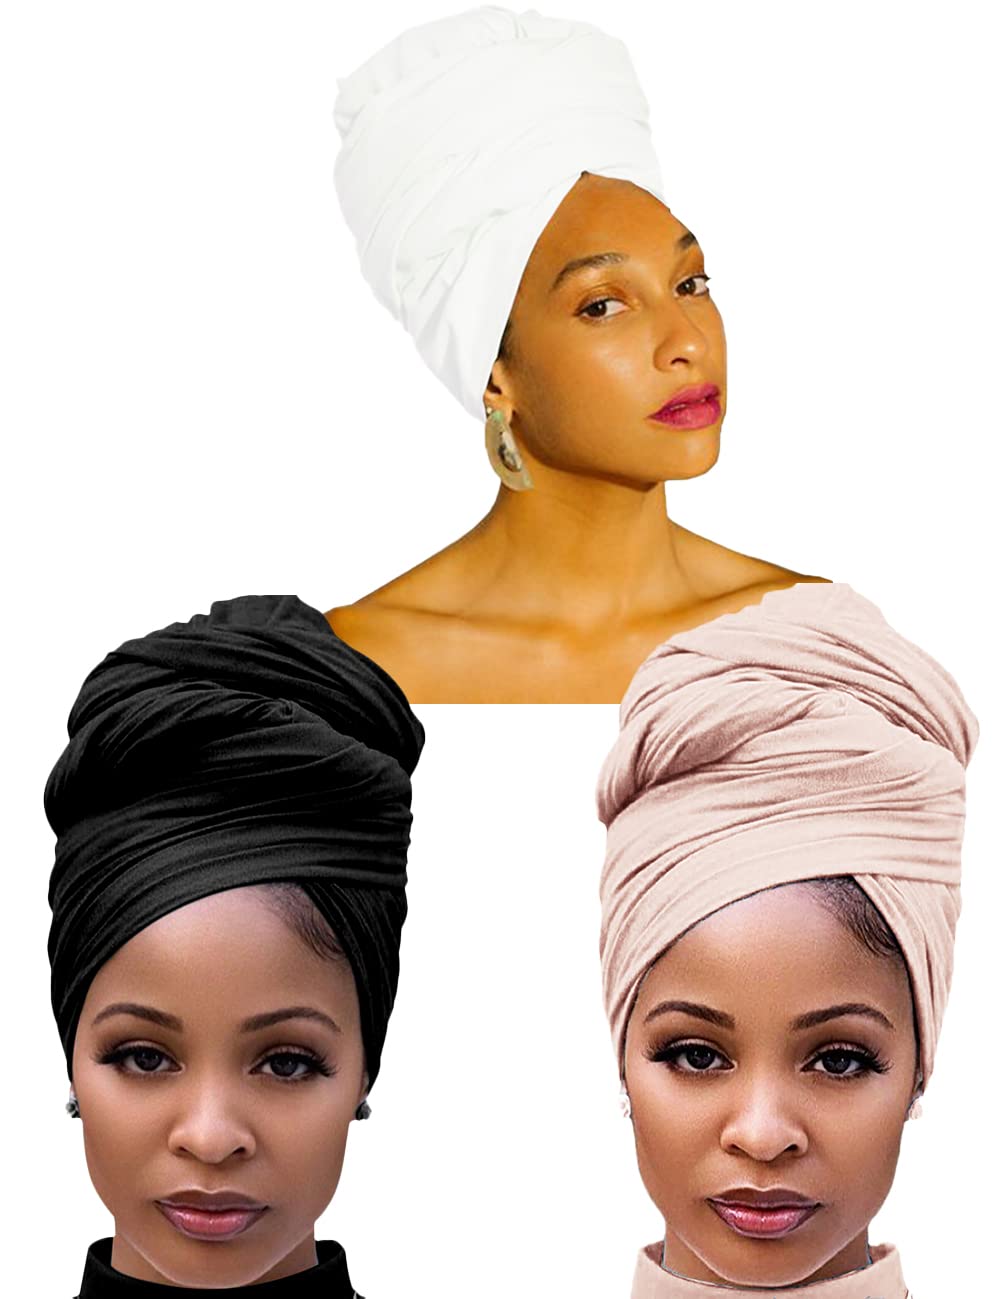 Harewom Black Hair Wrap for Women Long Stretch Jersey Head Scarf Summer Breathable Lightweight Turban Solid Color